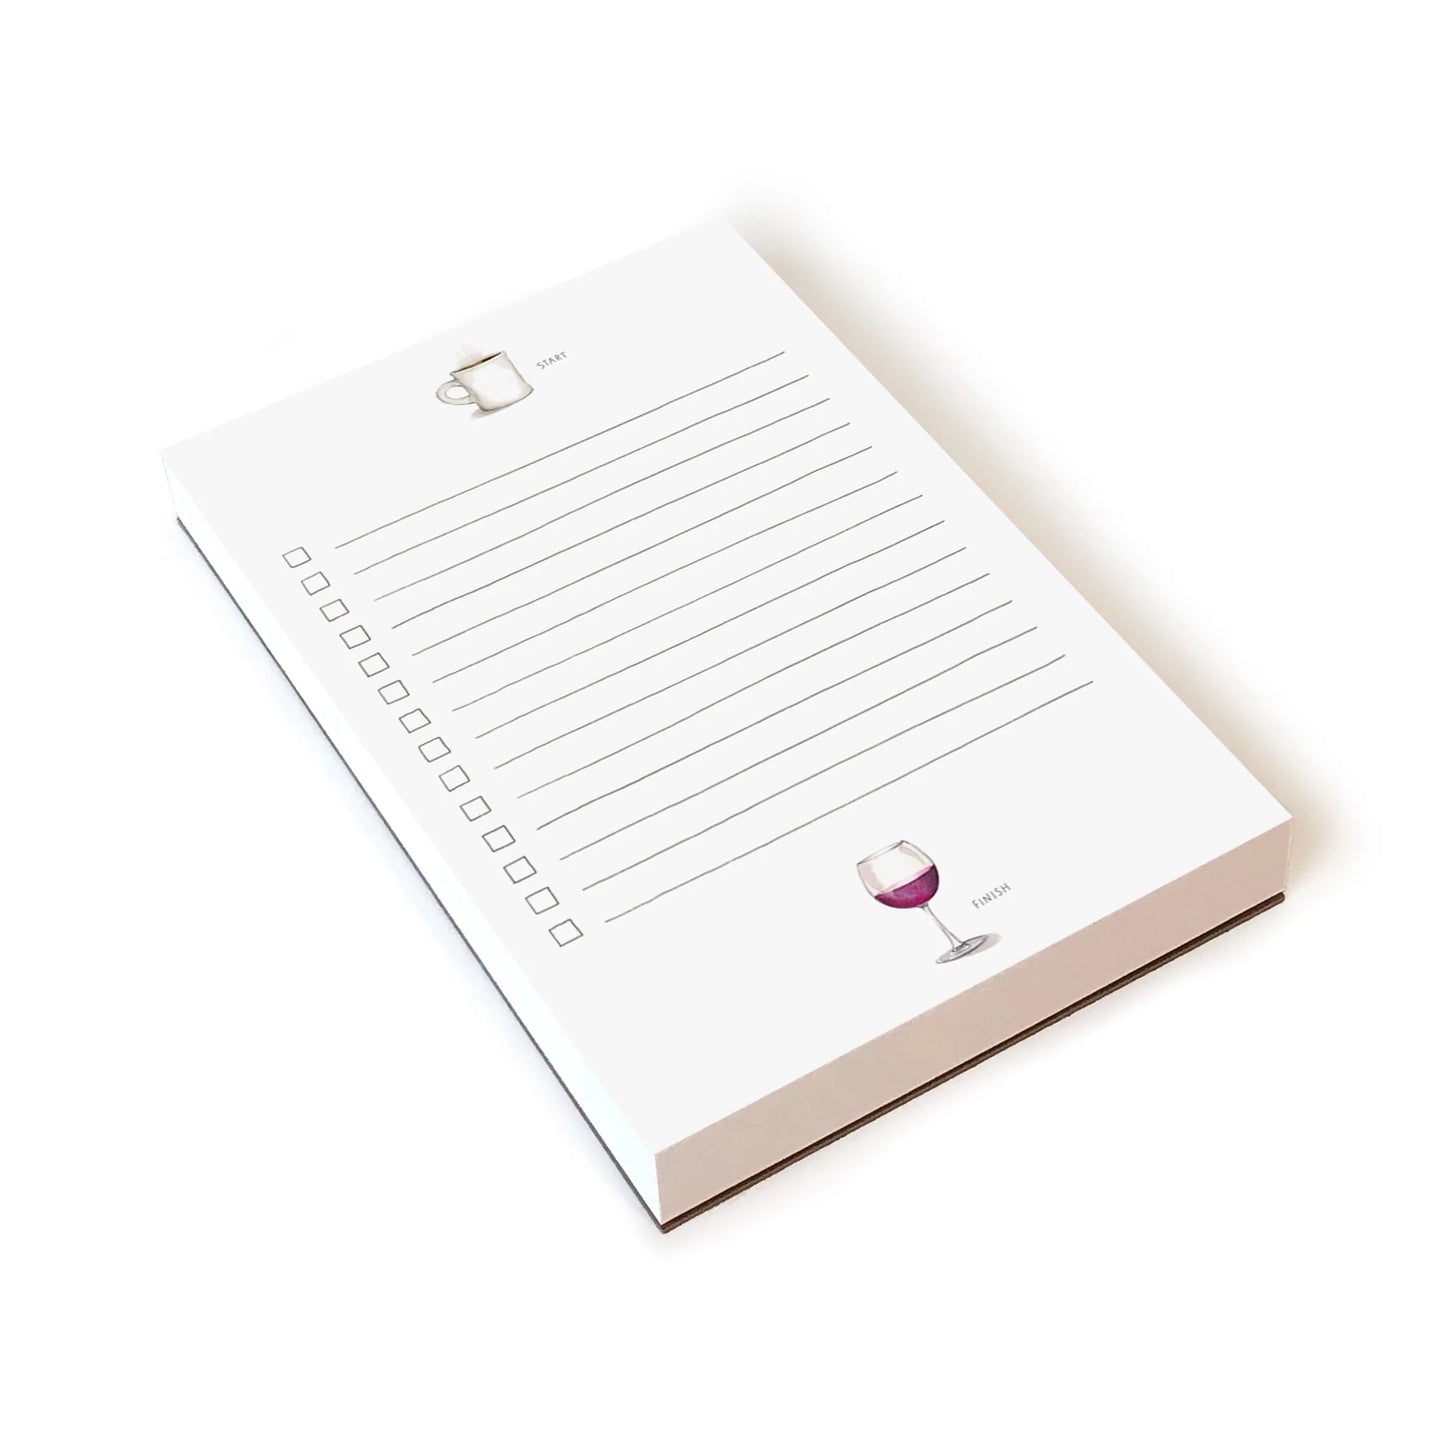 Start + Finish Notepad by E. Frances Paper